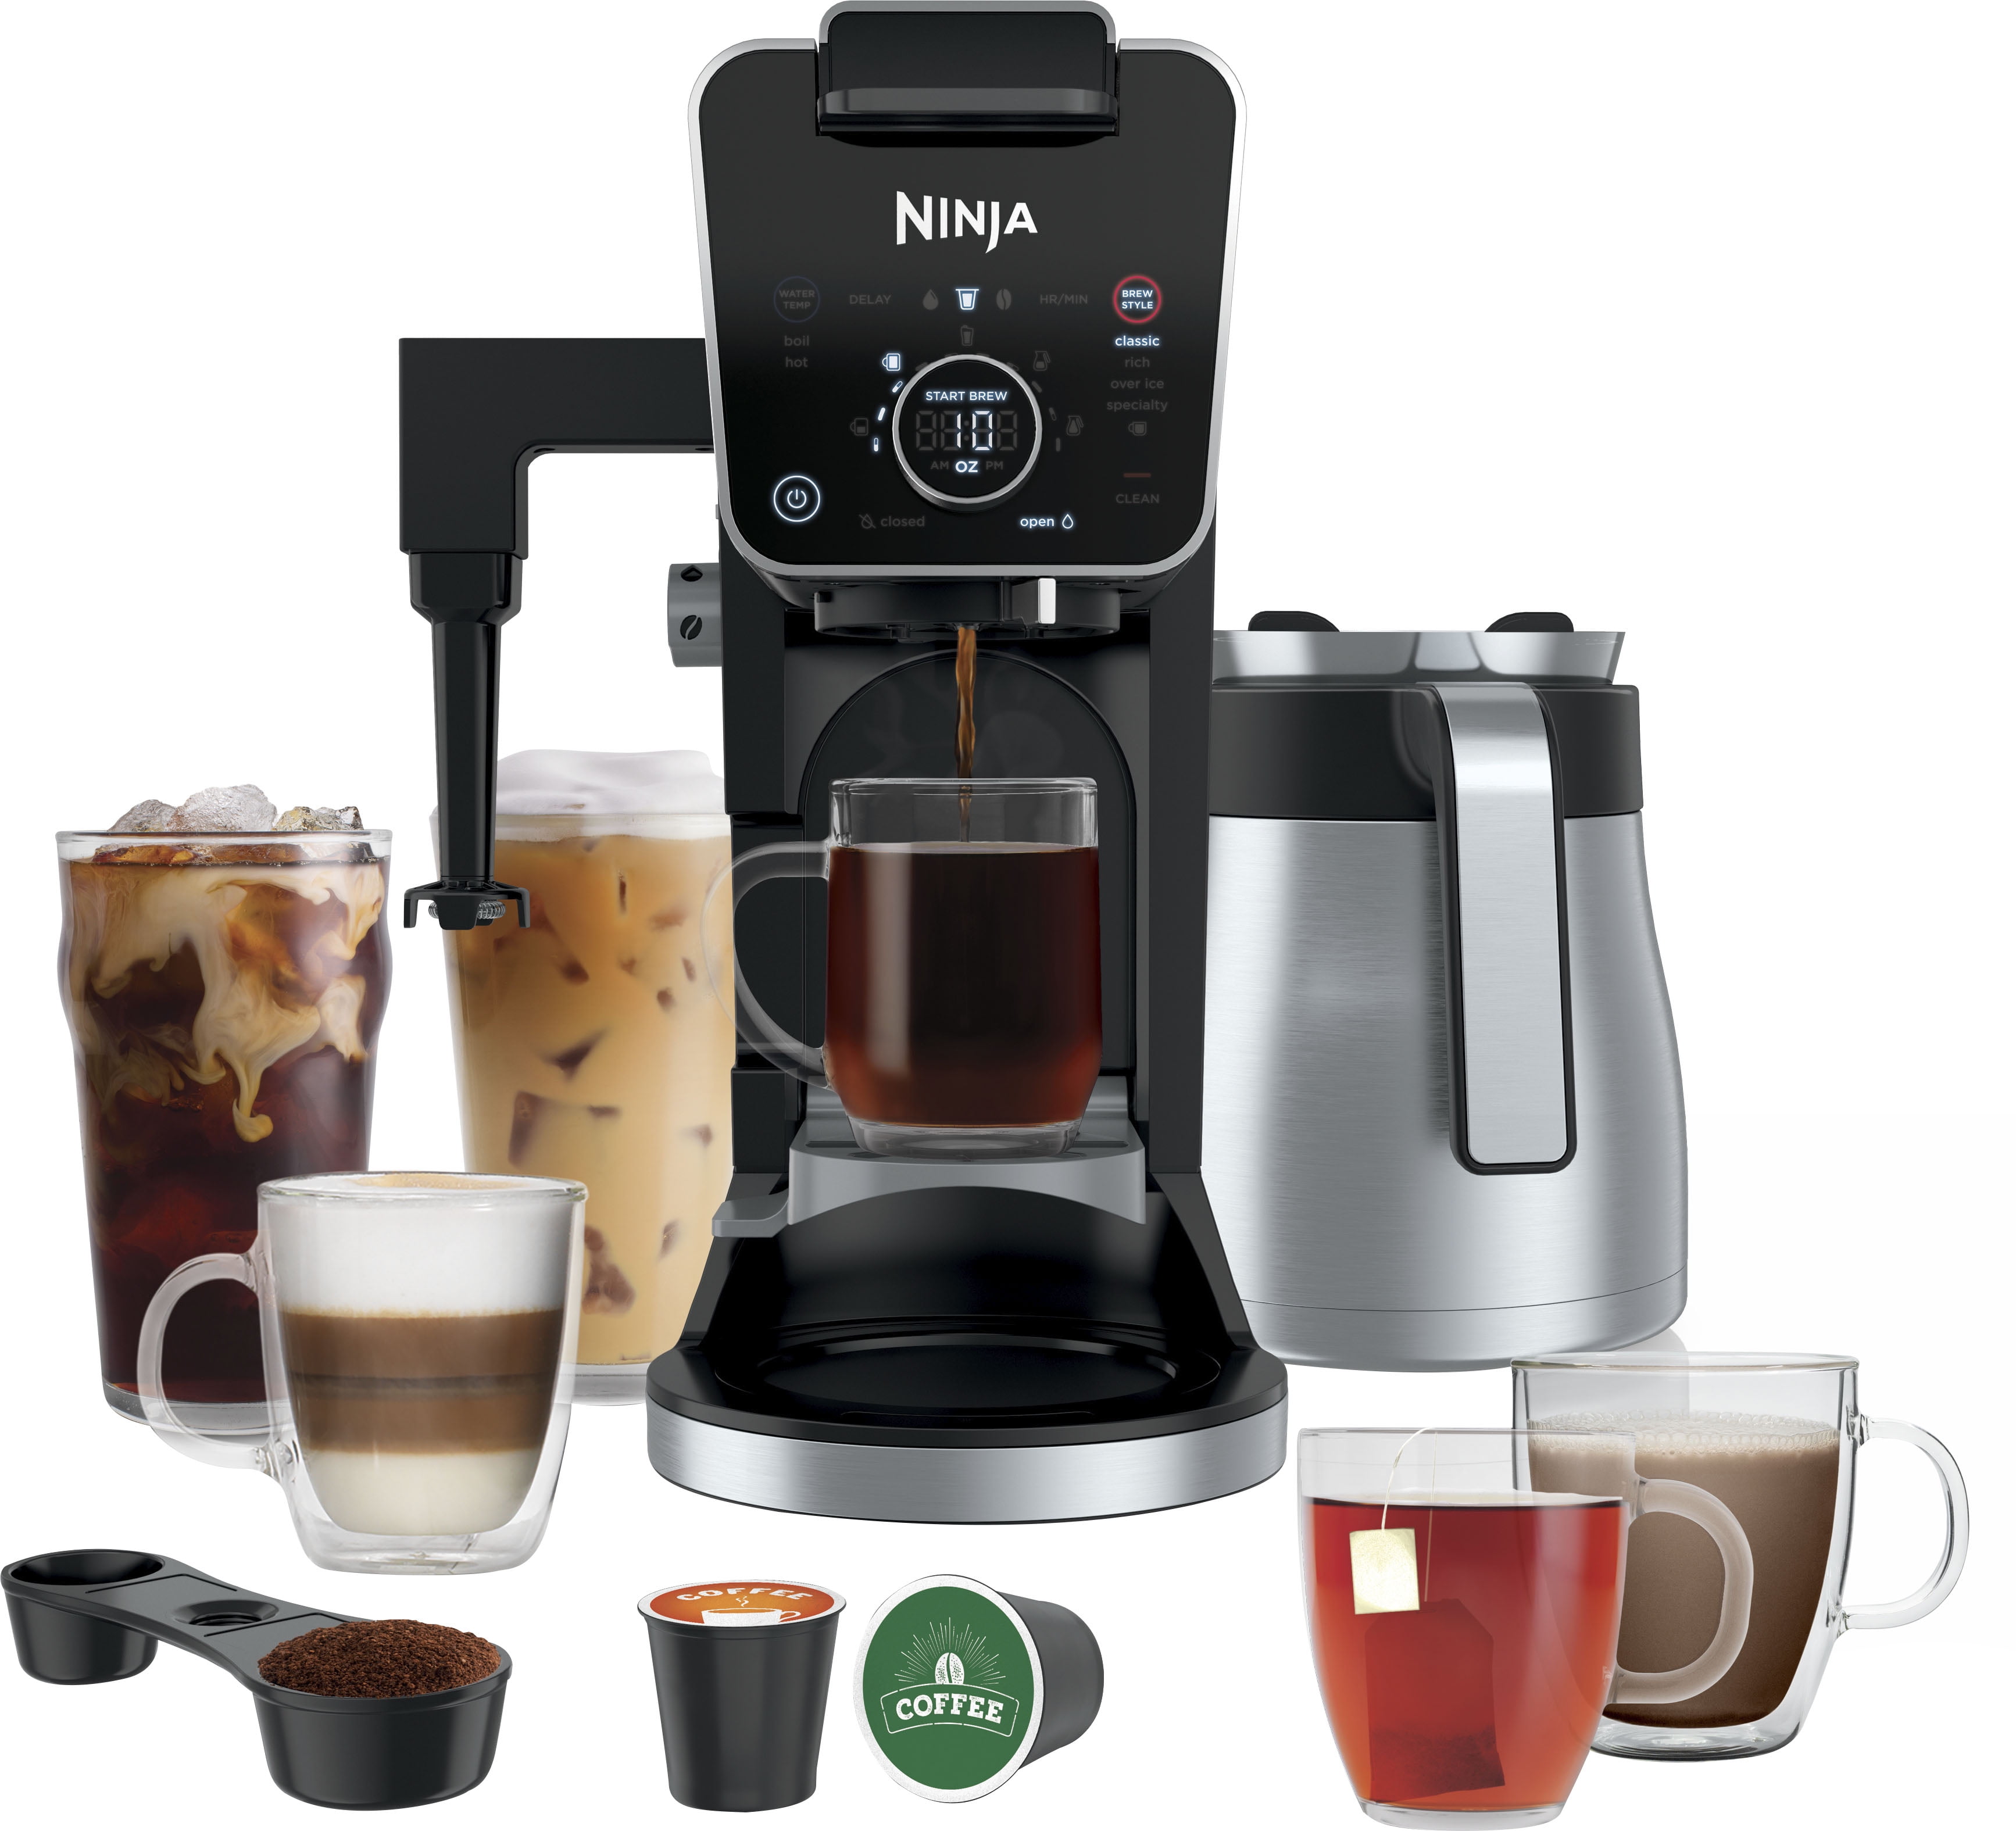 Ninja Specialty Coffee maker 2022 With milk frother 